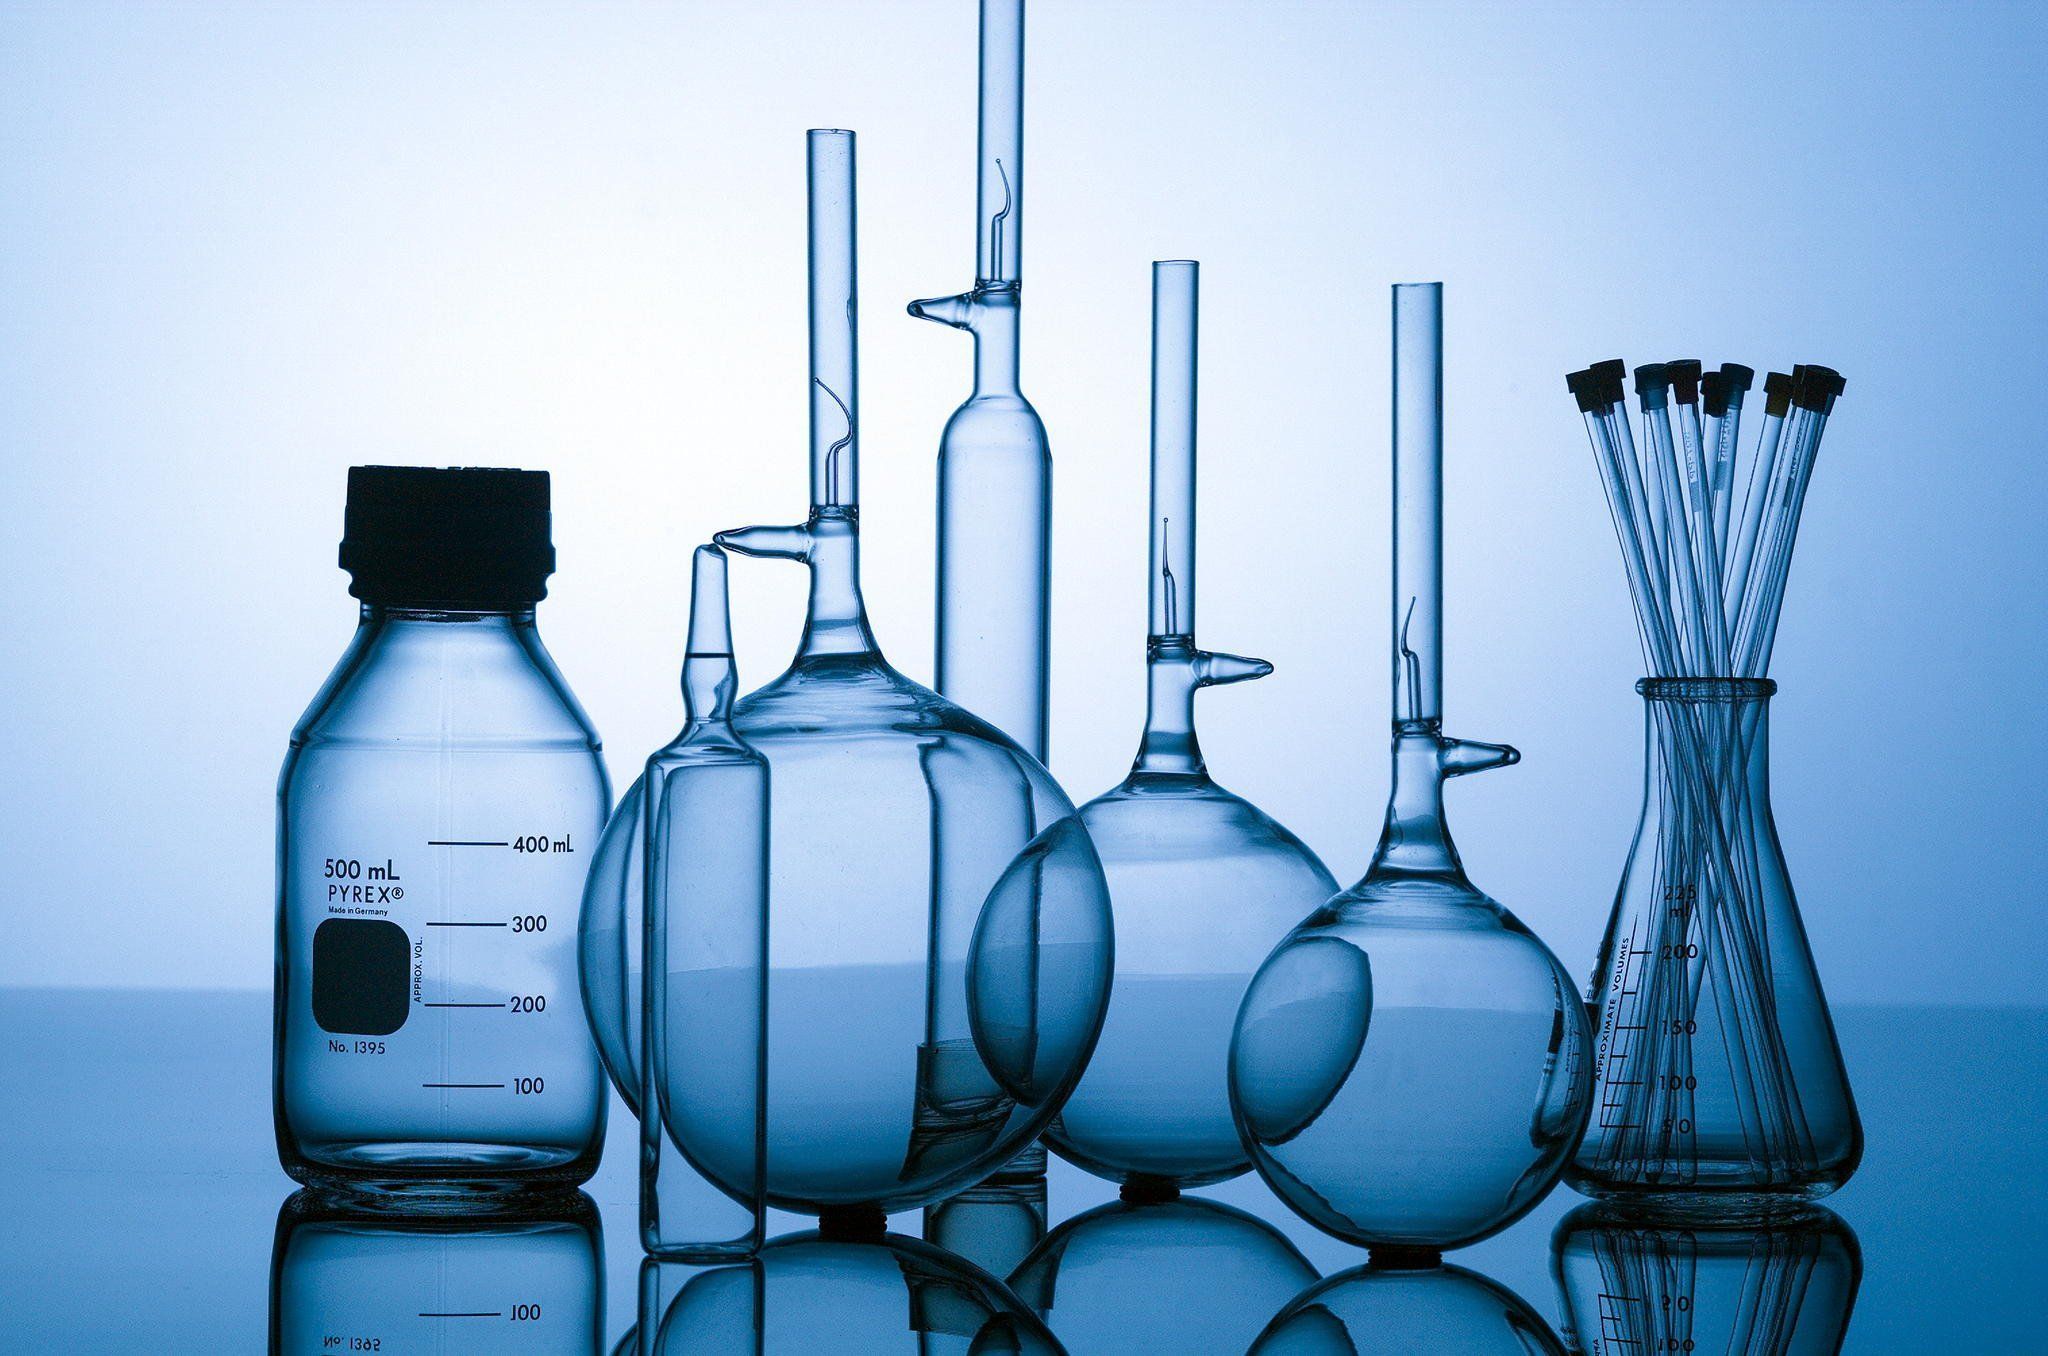 A collection of laboratory glassware including bottles and beakers - Chemistry